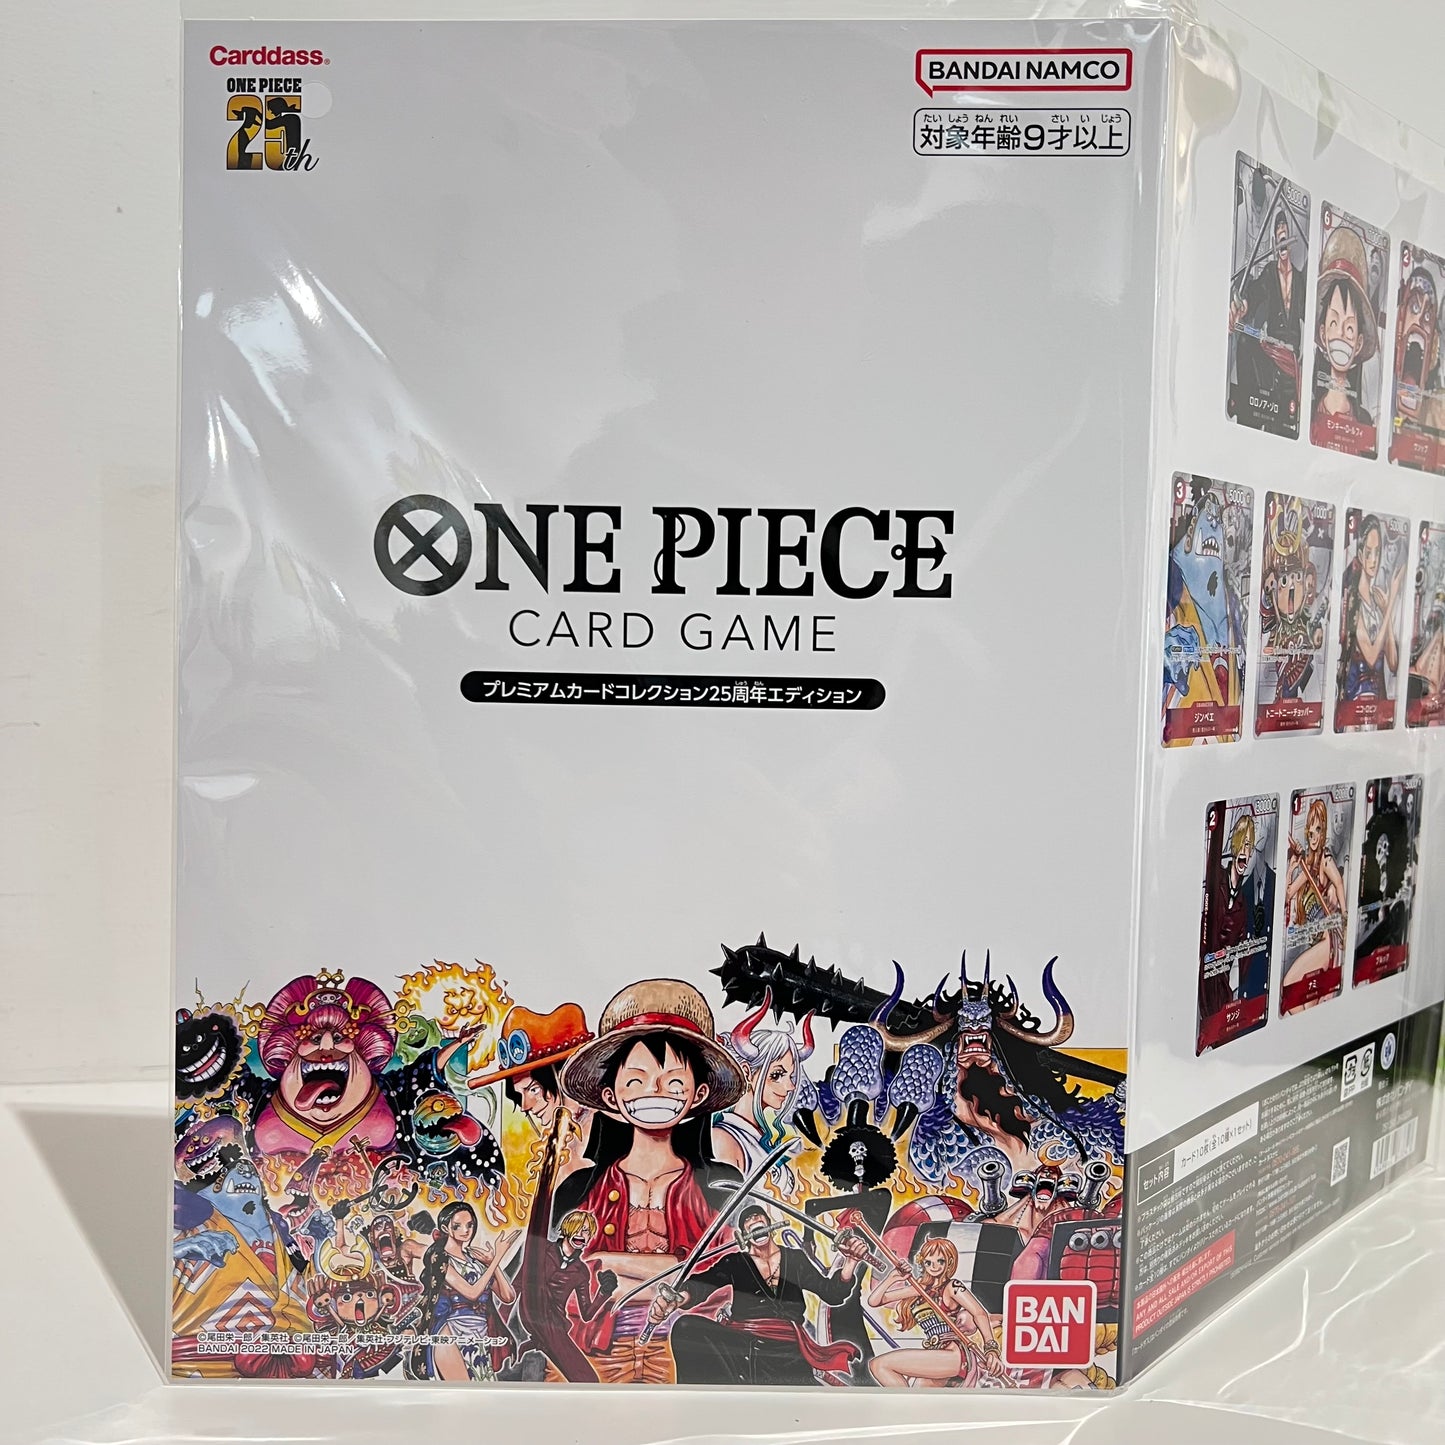 ONE PIECE CARD GAME - JP PREMIUM CARD COLLECTION SET 25TH EDITION